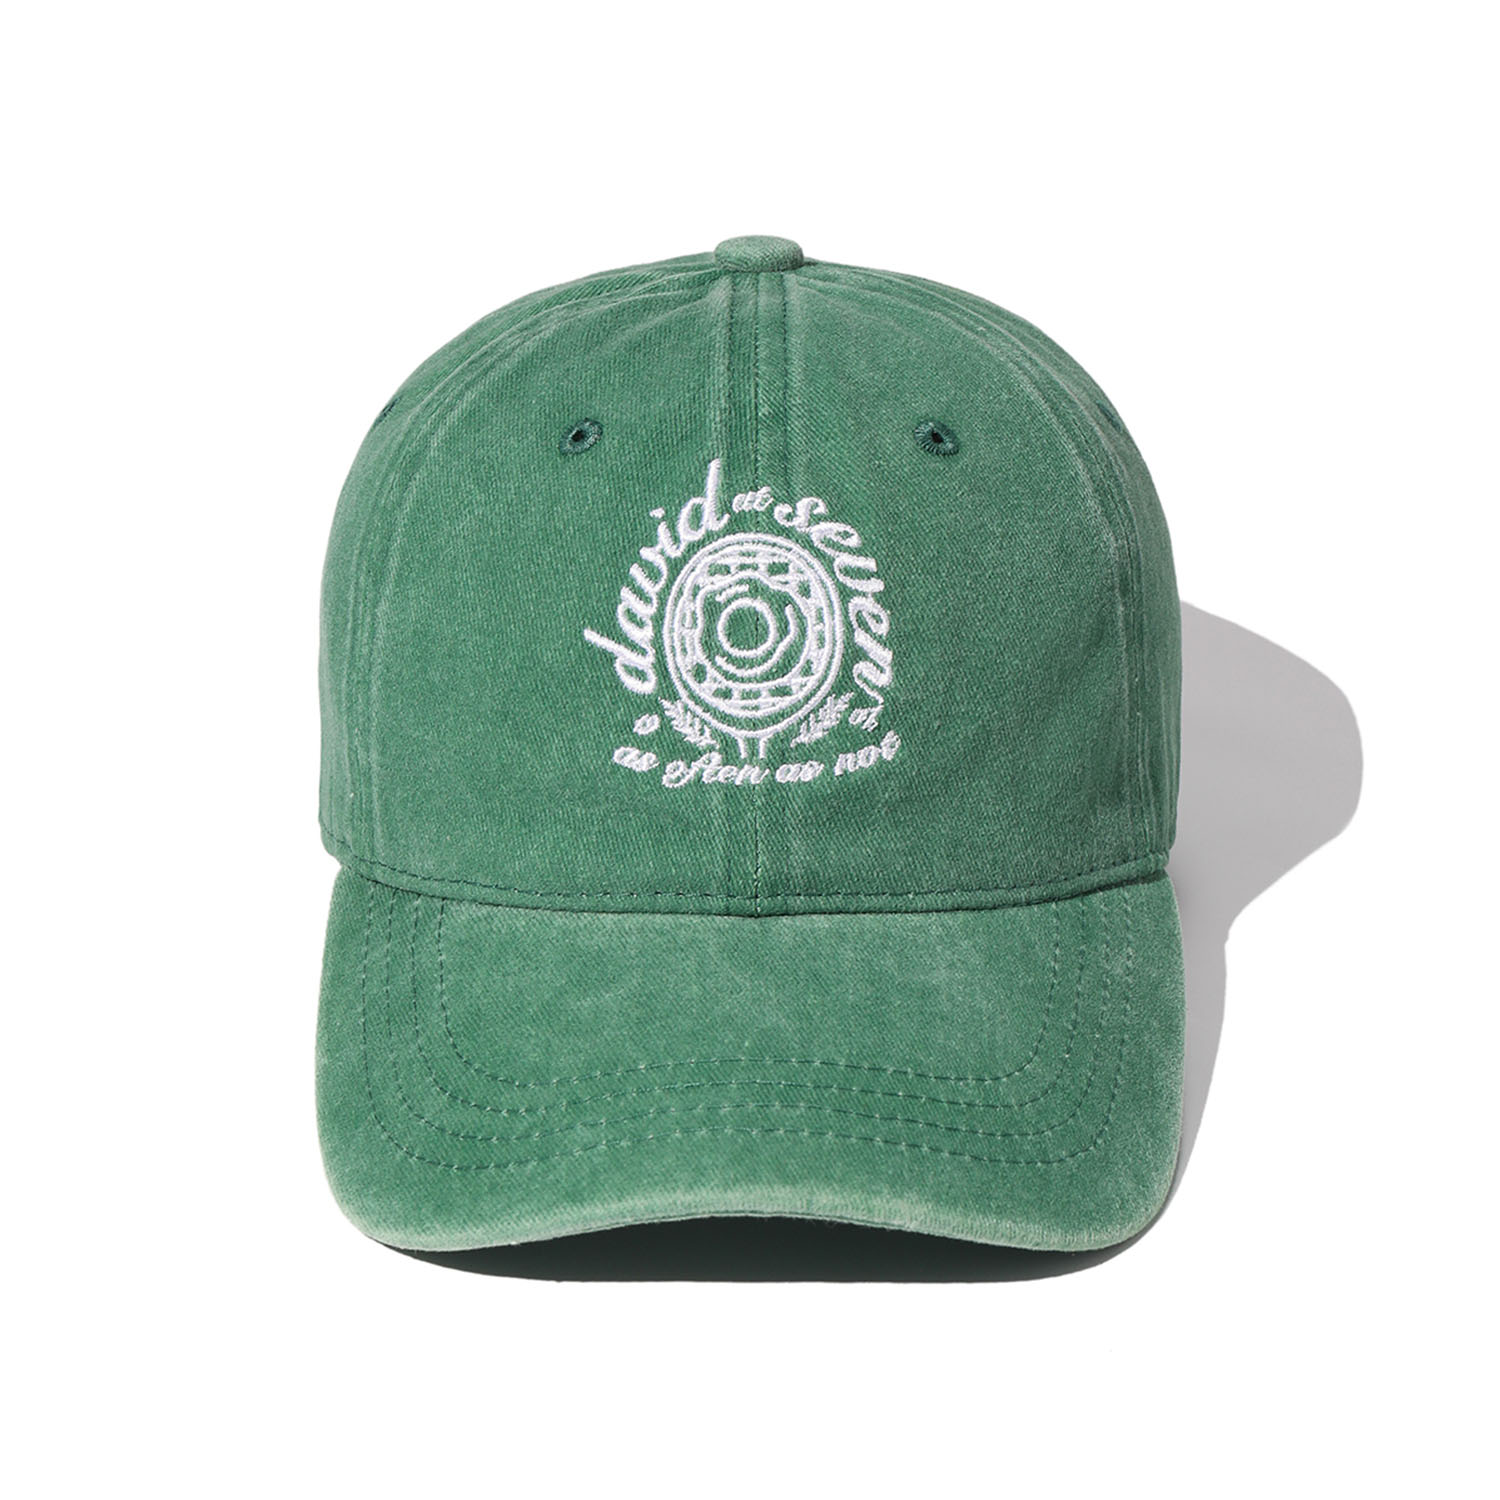 Sunny-Side Up Racket cap_green